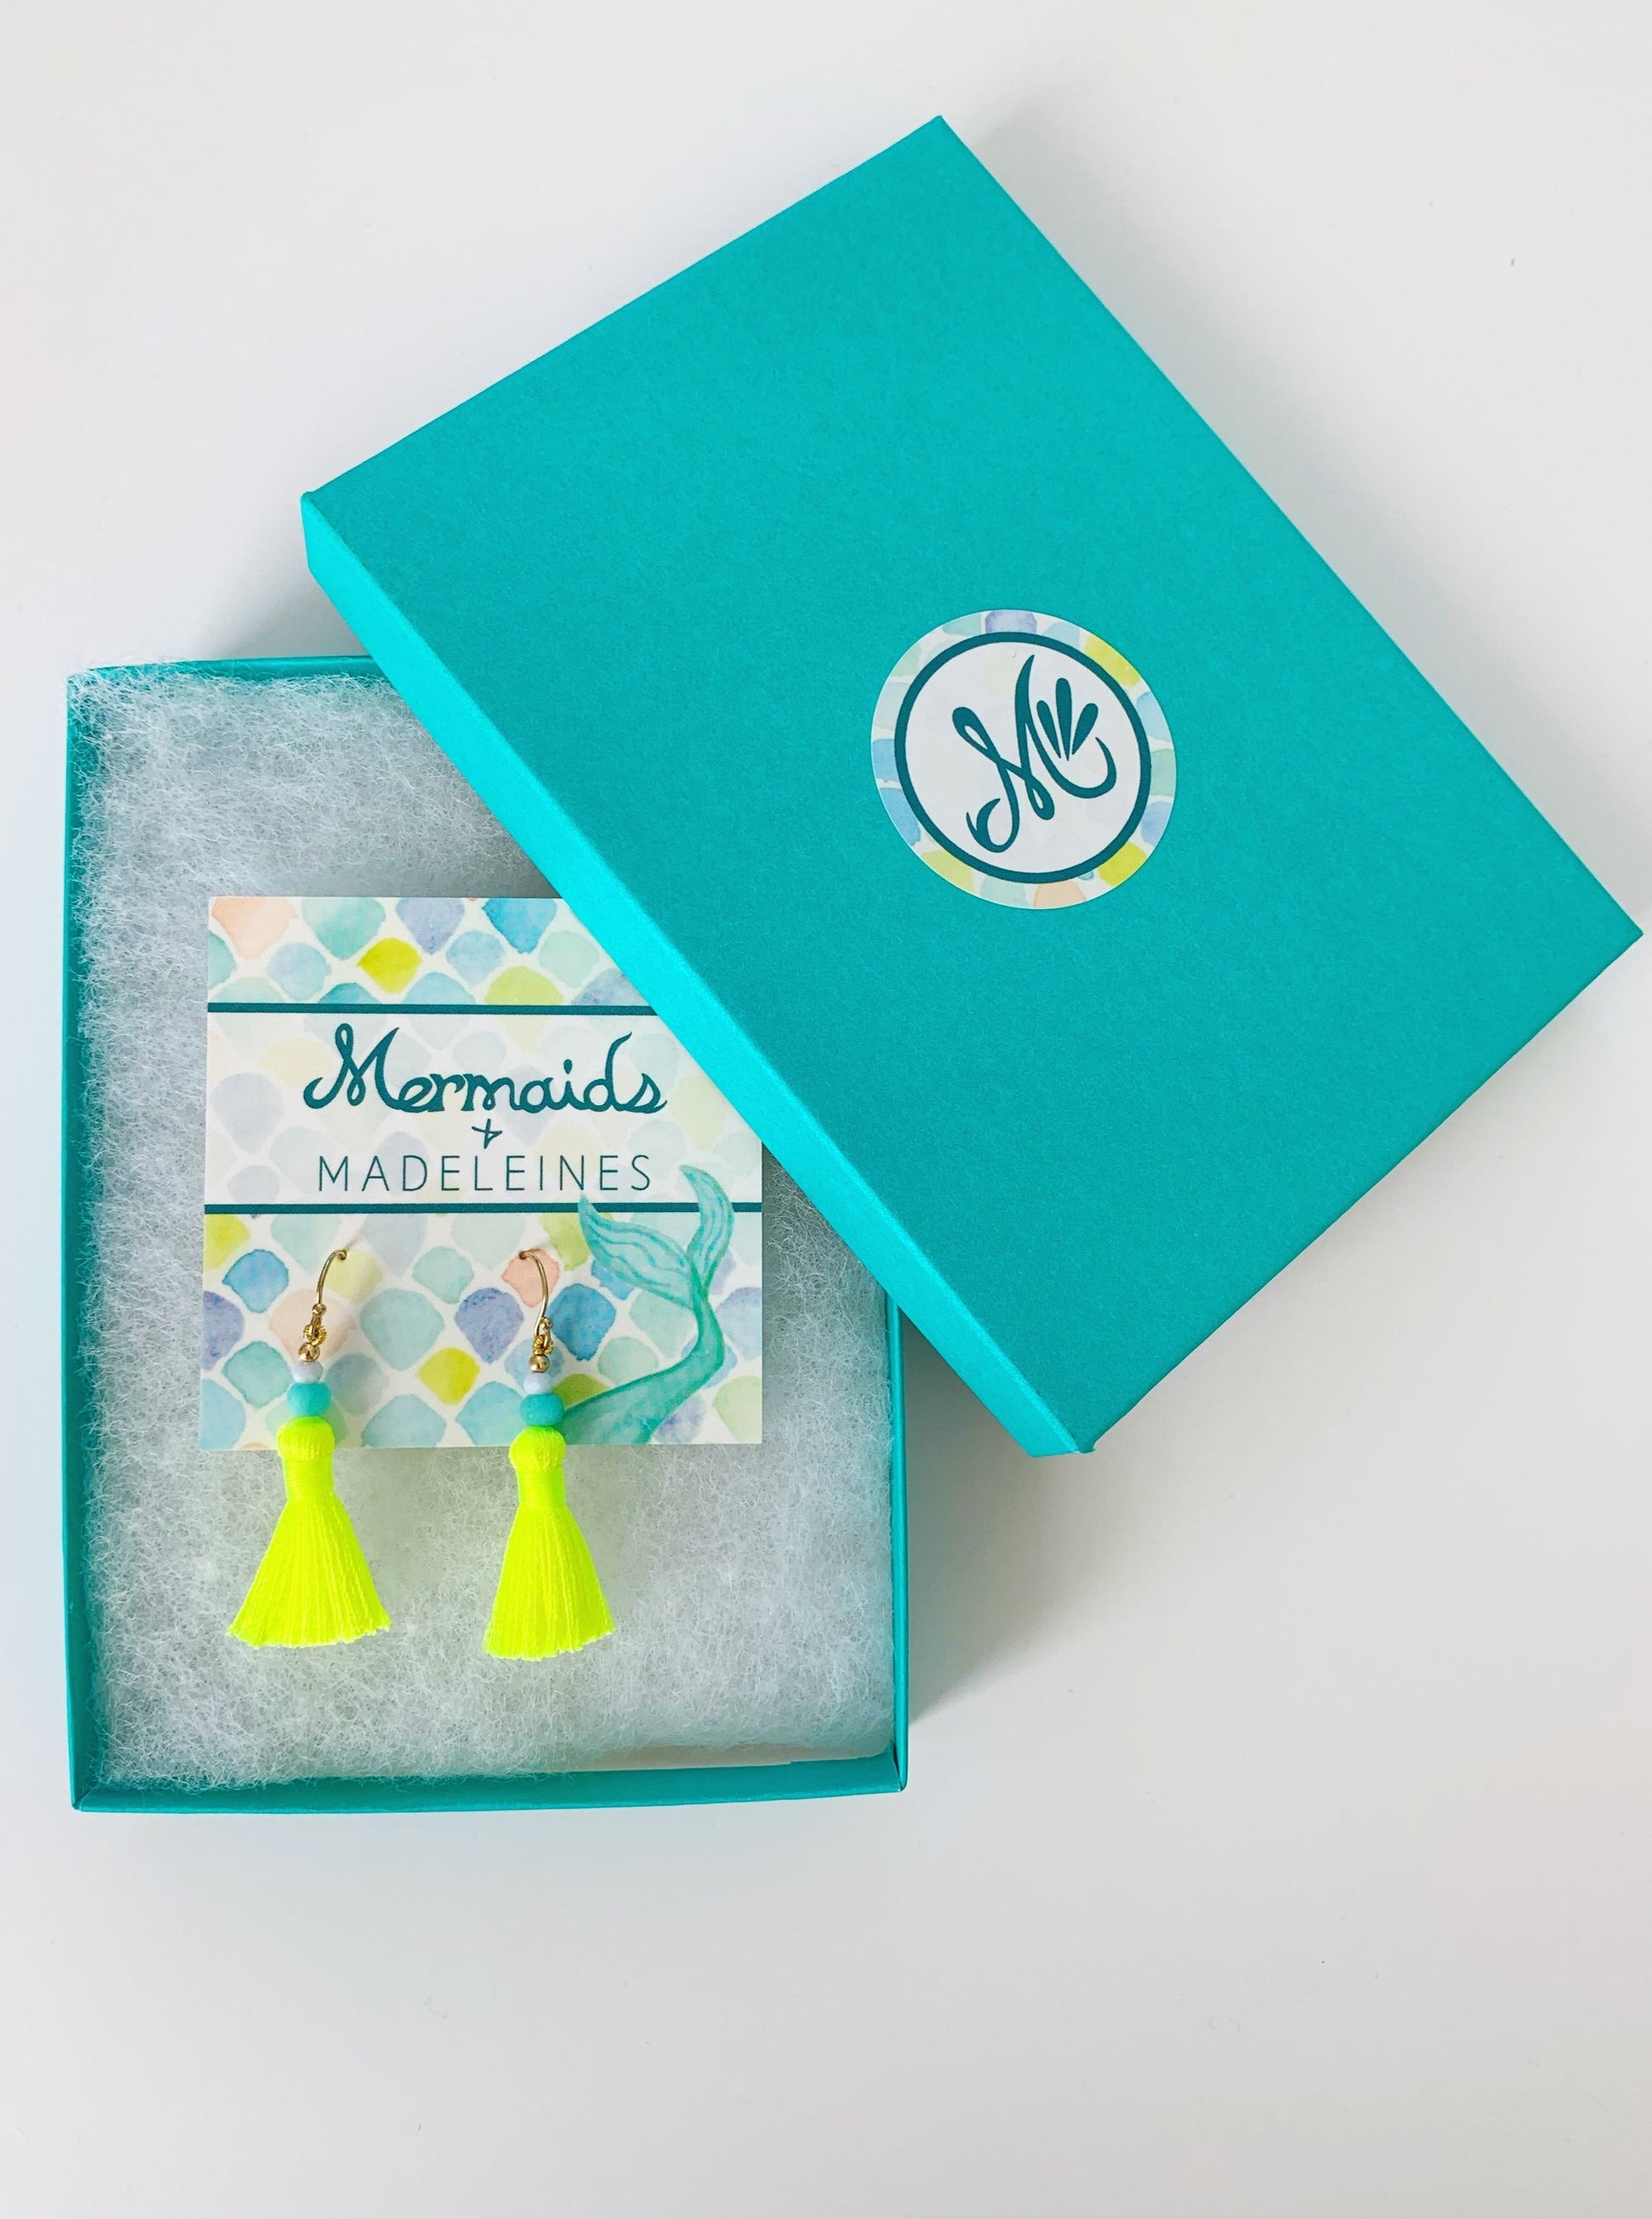 Captiva Tassel EArrings, neon yellow with semiprecious gems and 14k gold filled. This pair is photographed in a teal gift box on a white surface